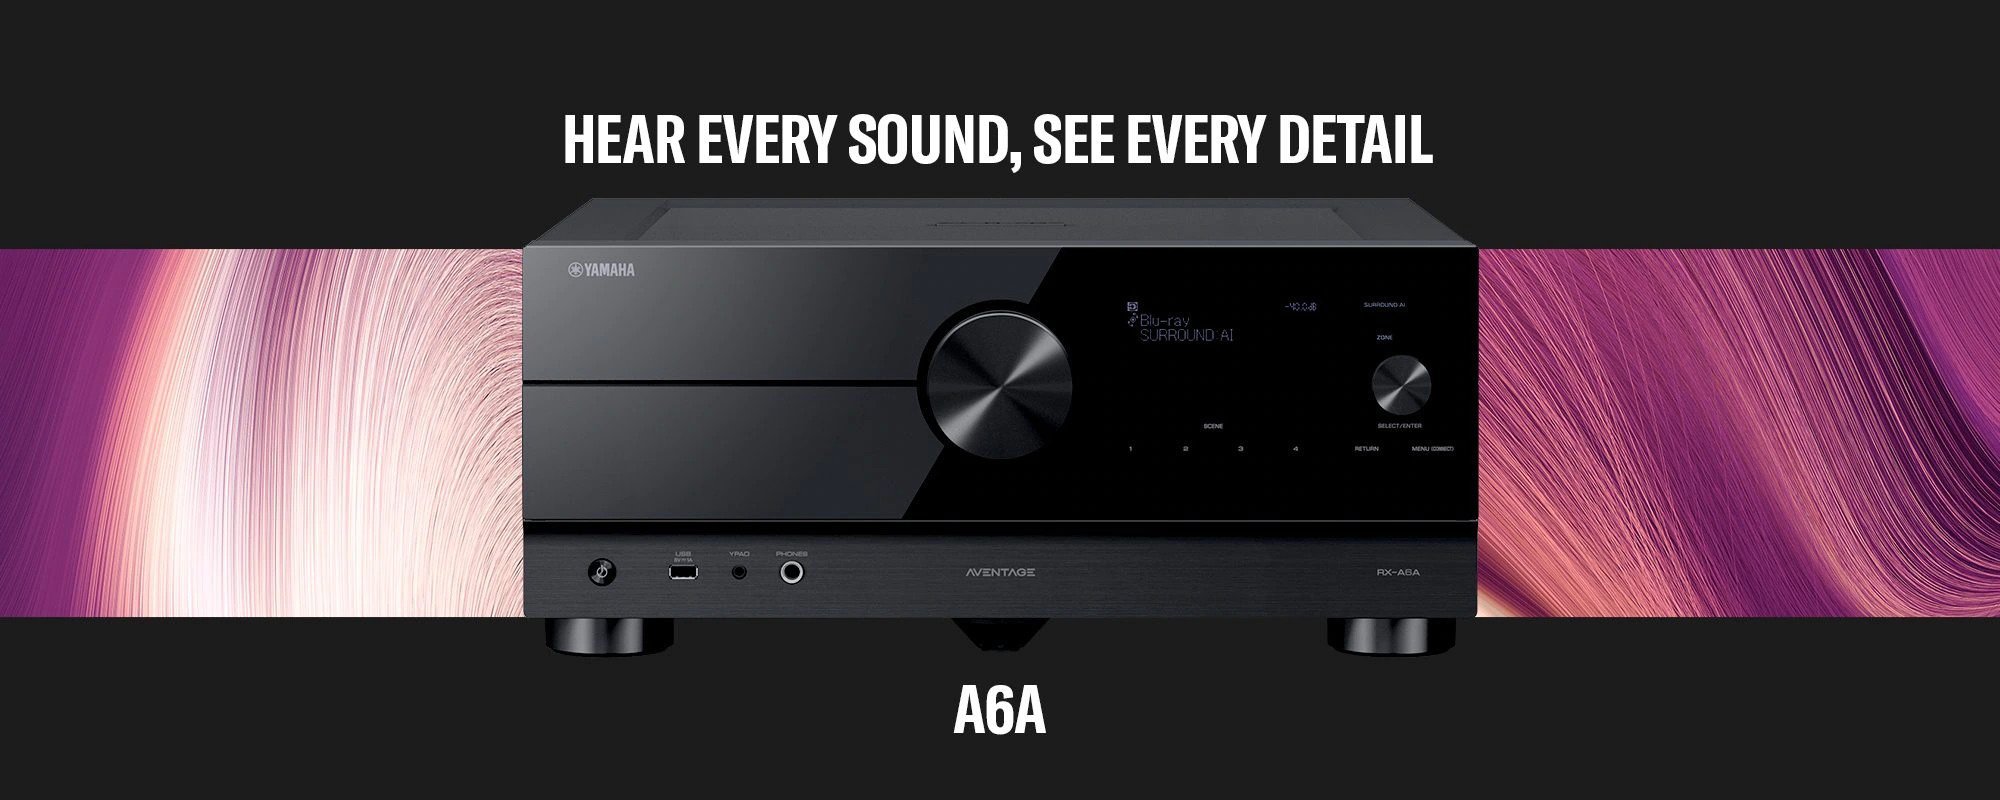 Yamaha RX-A6A AV Receiver in black with pink design background and white text.